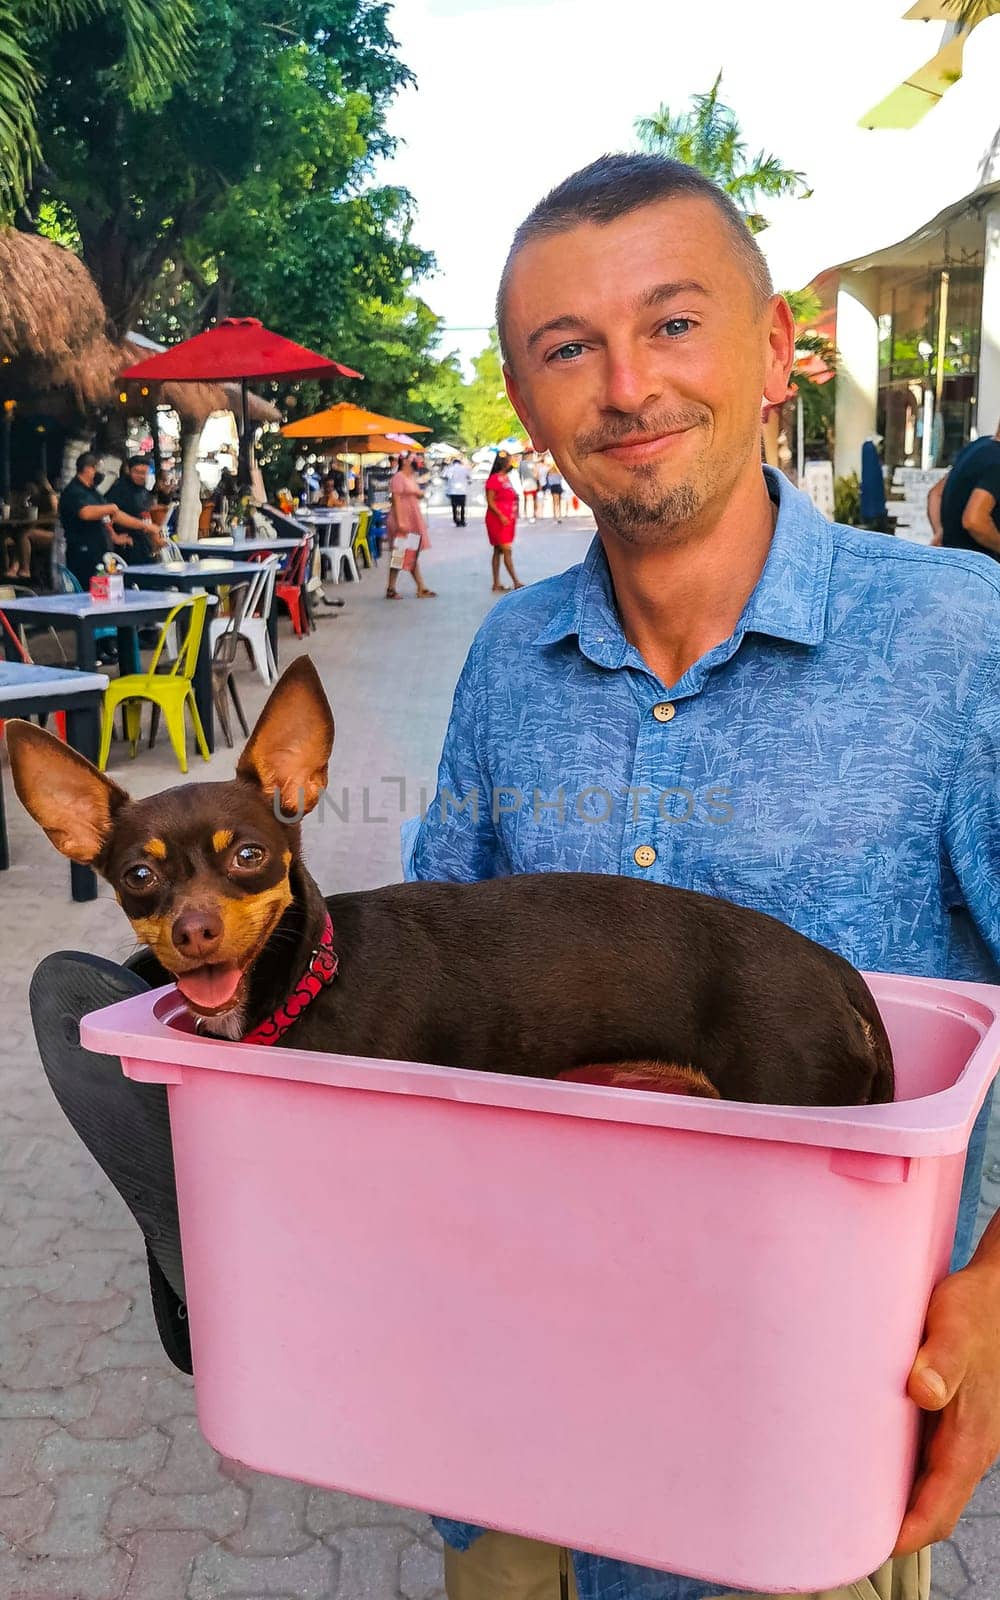 Happy man with dog in a pink box on his arms in Playa del Carmen Quintana Roo Mexico.